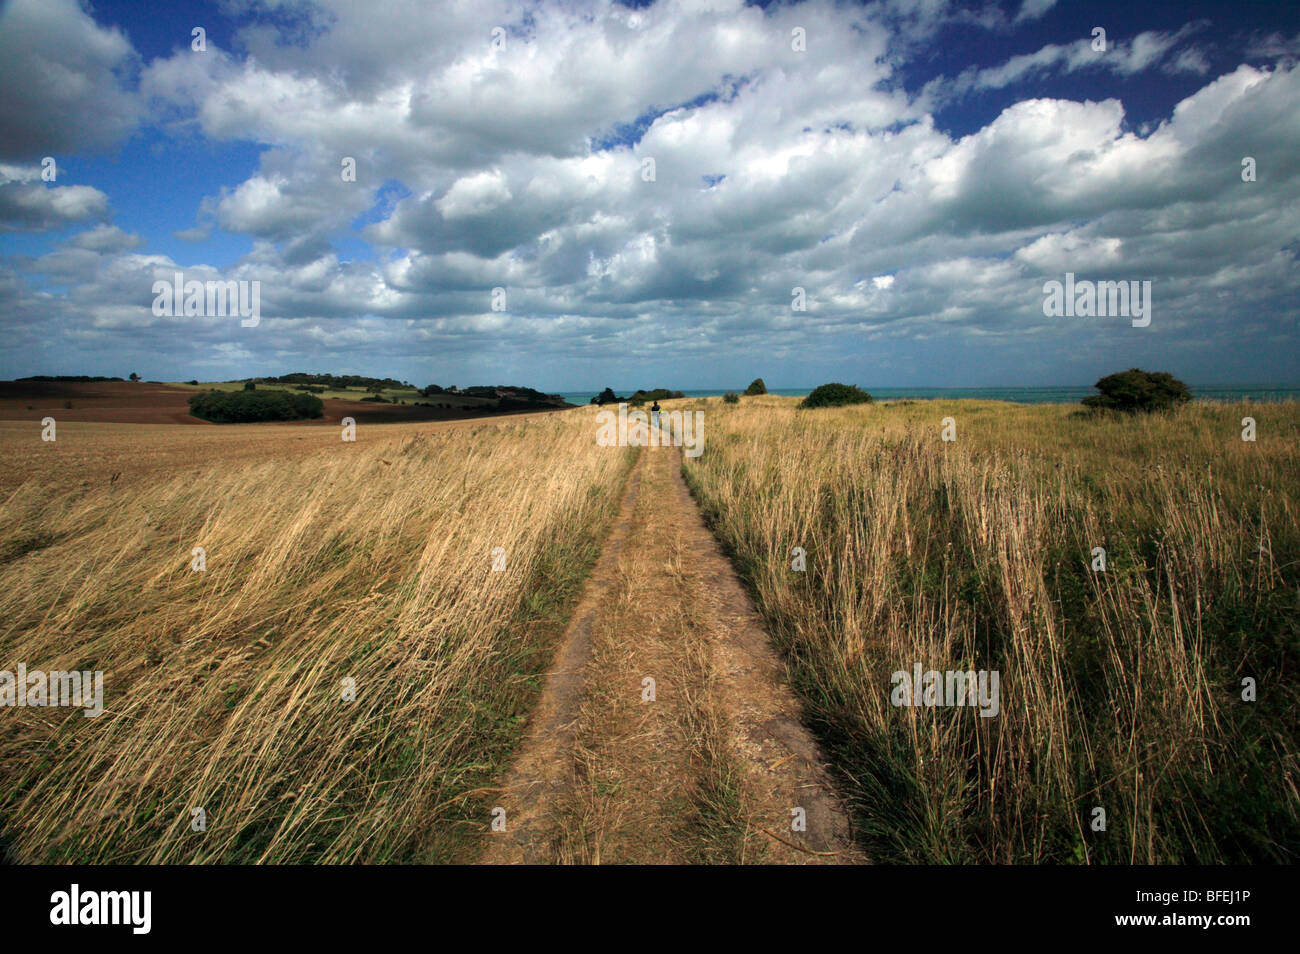 Beautiful evening landscape on the Saxon Shore Way between St Margrets Bay and Kingsdown, Kent Stock Photo